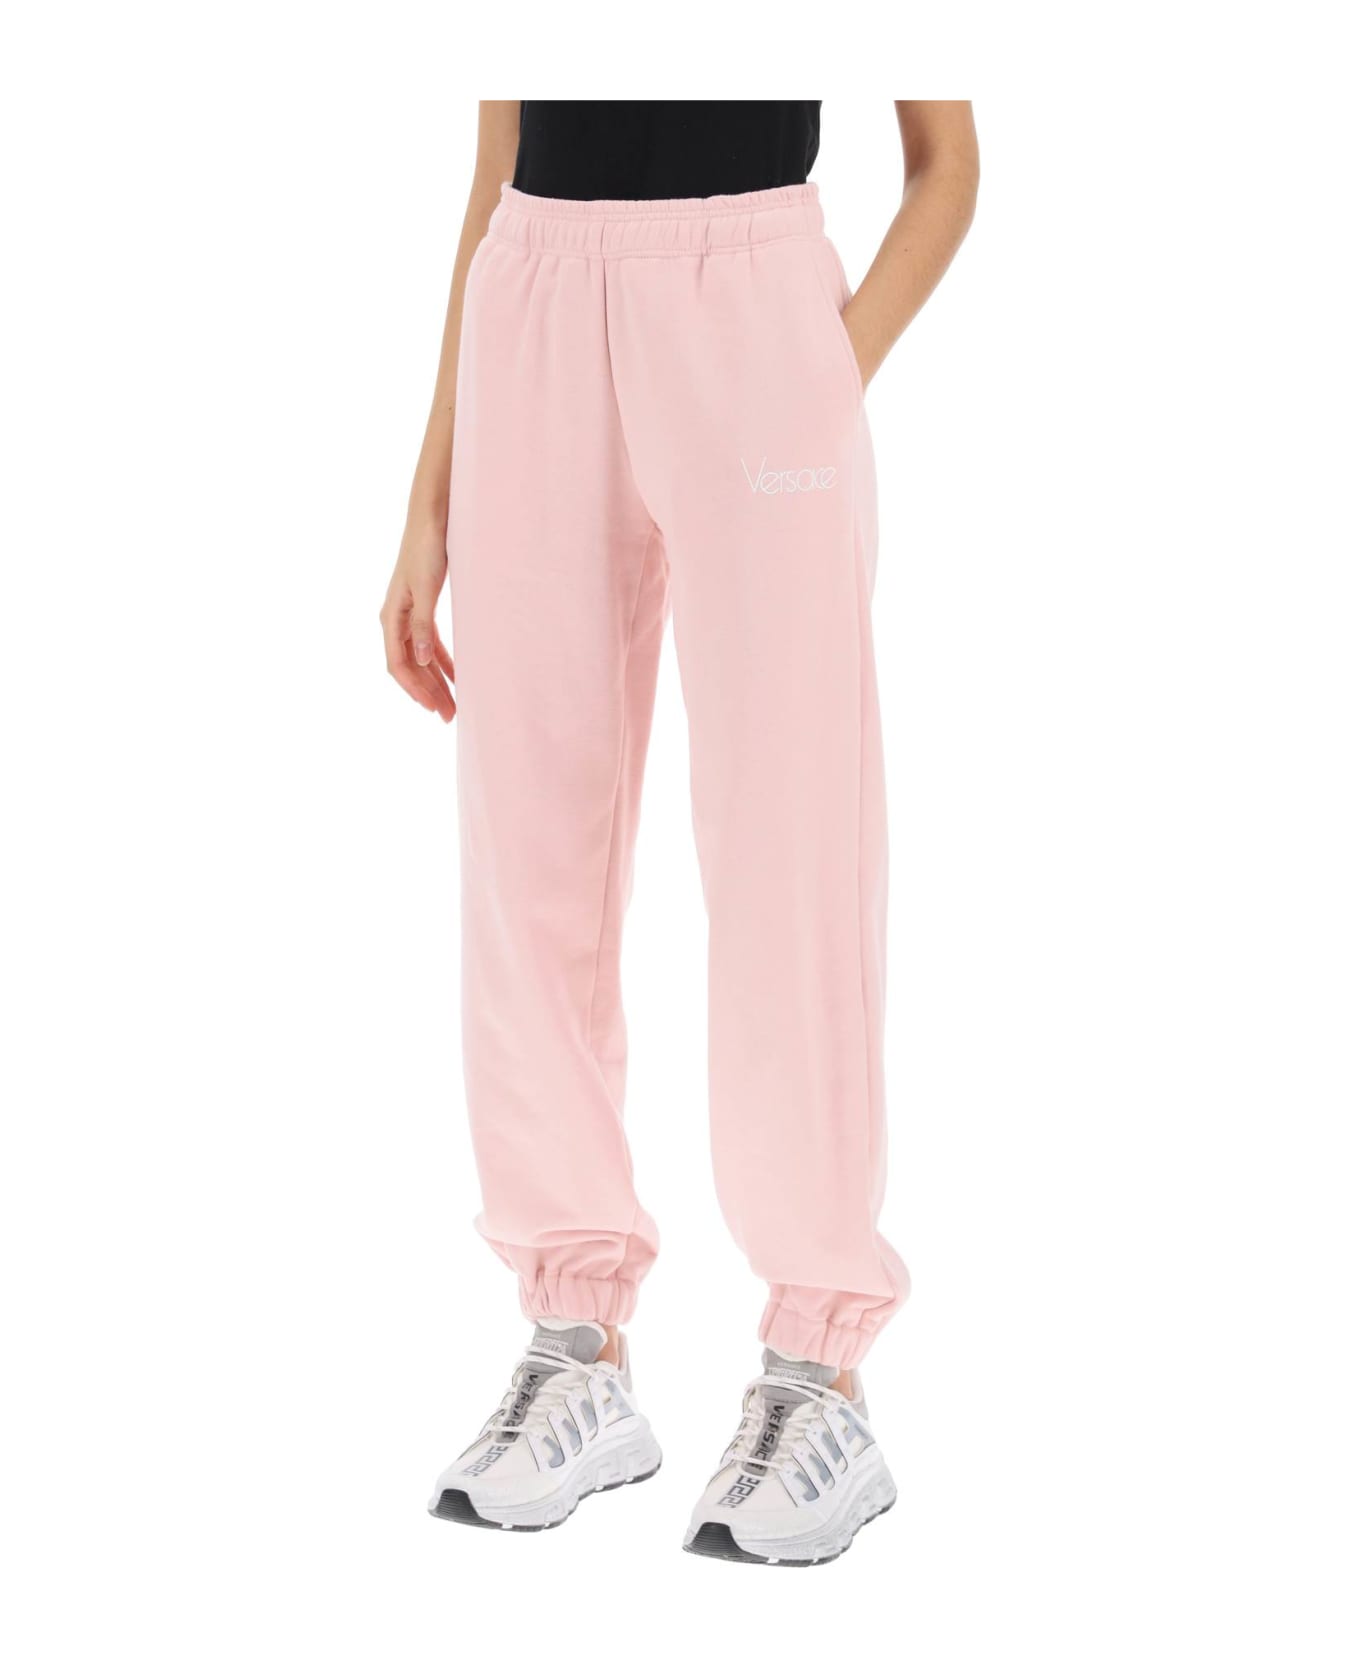 Versace 1978 Re-edition Joggers - PINK WHITE (Pink) スウェットパンツ